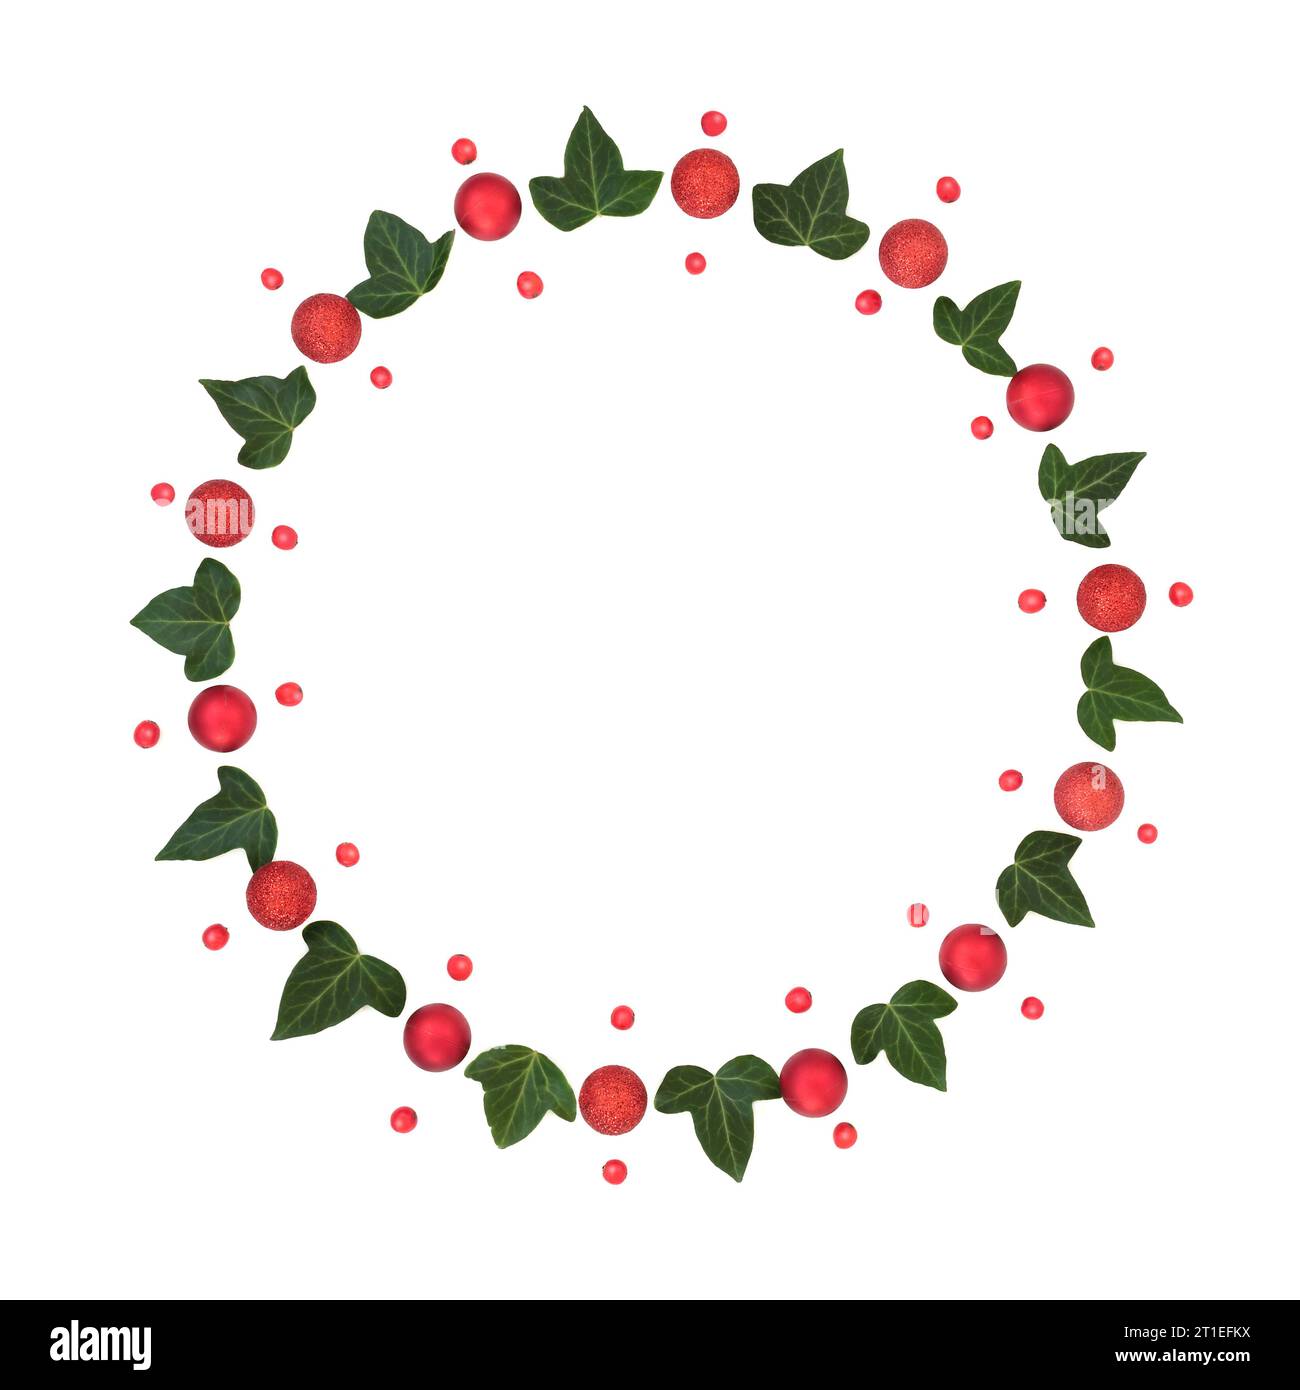 https://c8.alamy.com/comp/2T1EFKX/christmas-red-bauble-winter-holly-berry-mistletoe-and-ivy-leaf-wreath-abstract-on-white-traditional-festive-design-for-greeting-card-logo-card-l-2T1EFKX.jpg